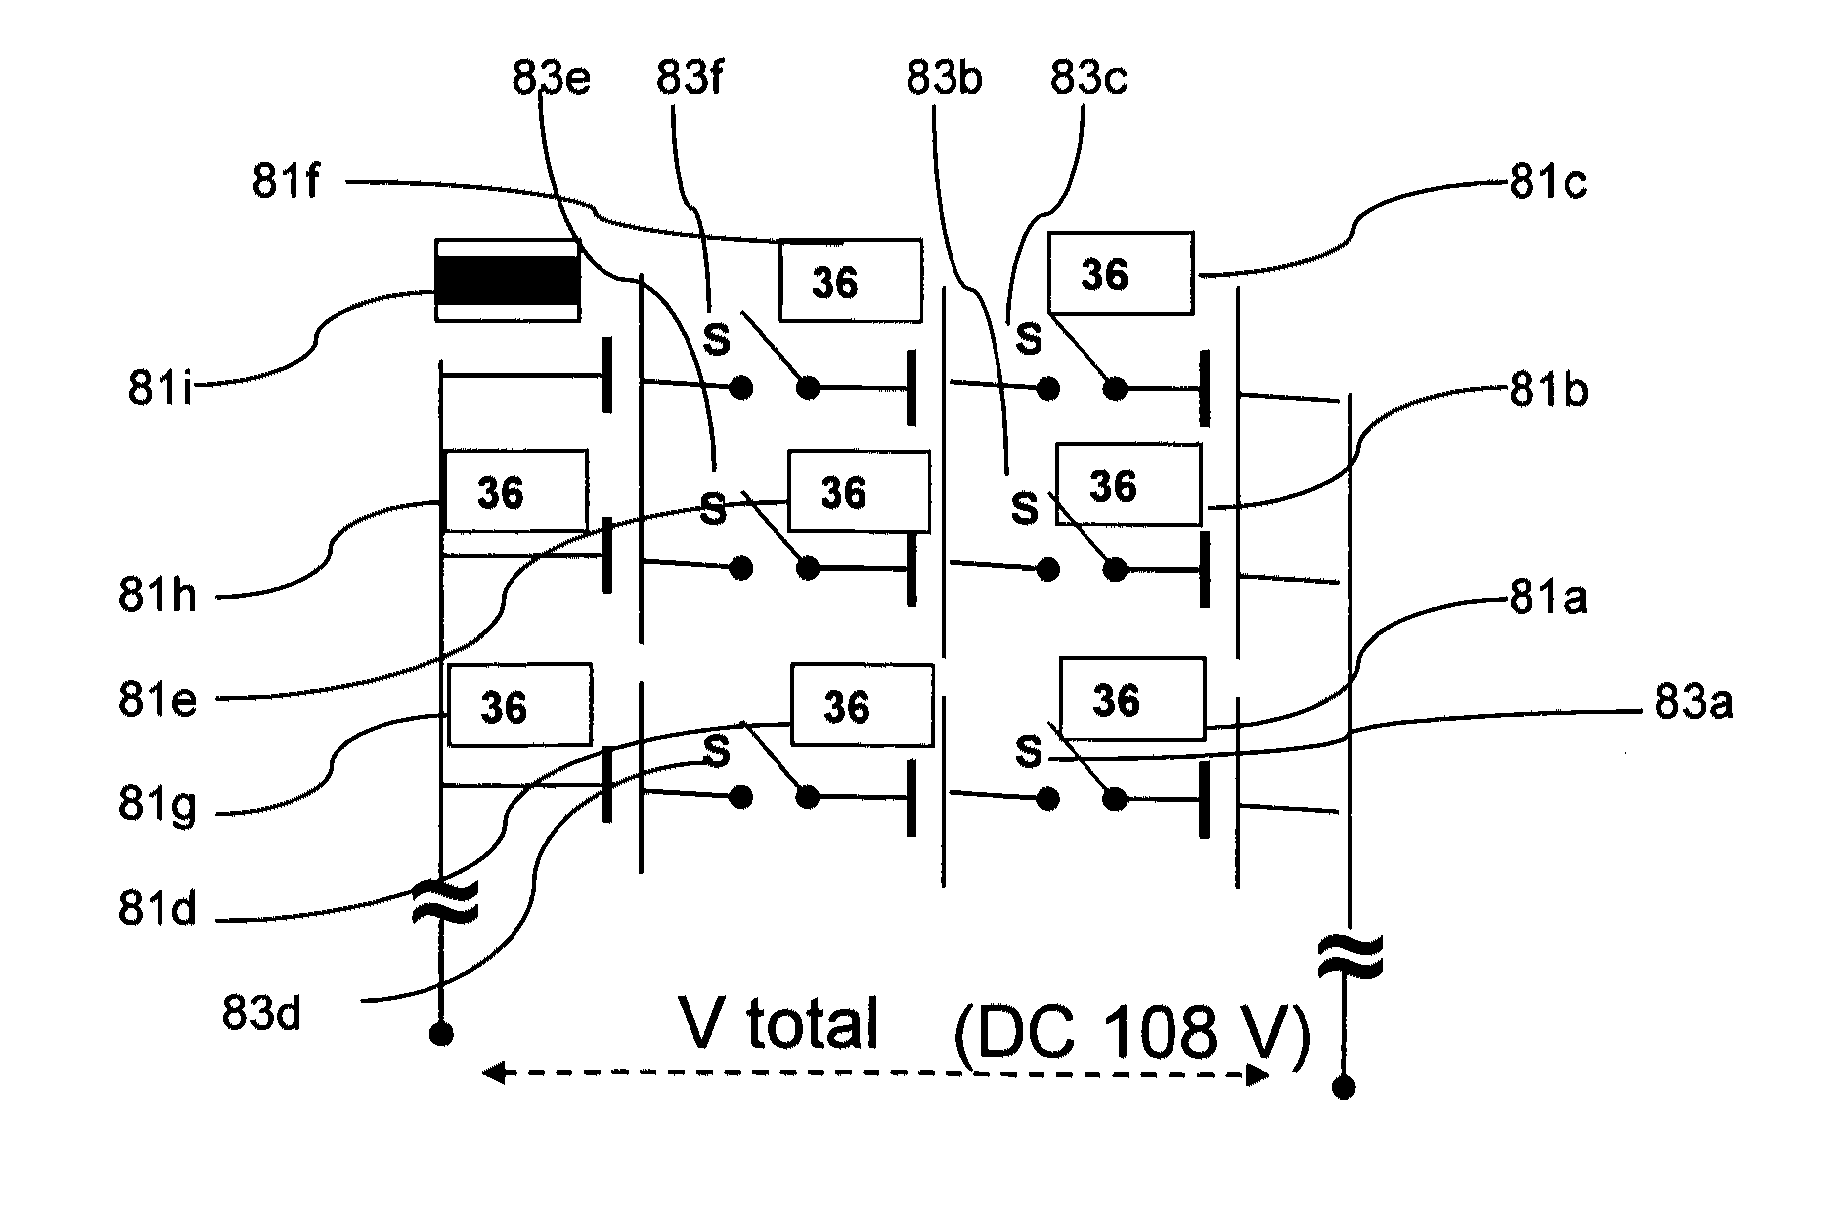 Method and apparatus for integrated electric power generation, storage and supply distributed and networked at the same time